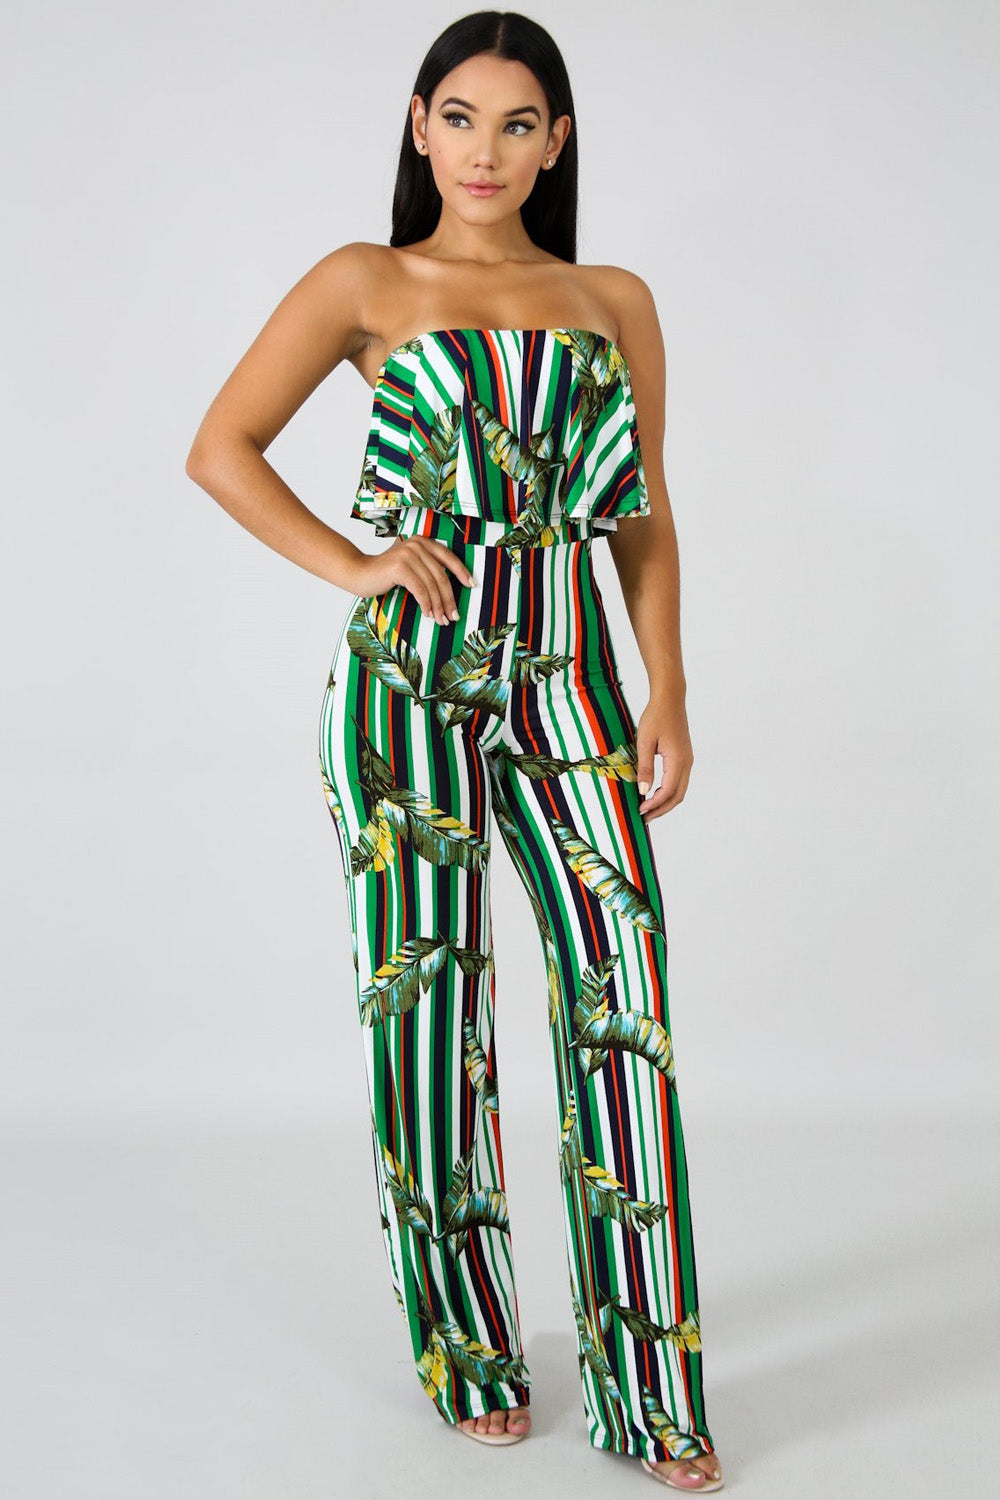 goPals strapless jumpsuit with all over leaf print. 